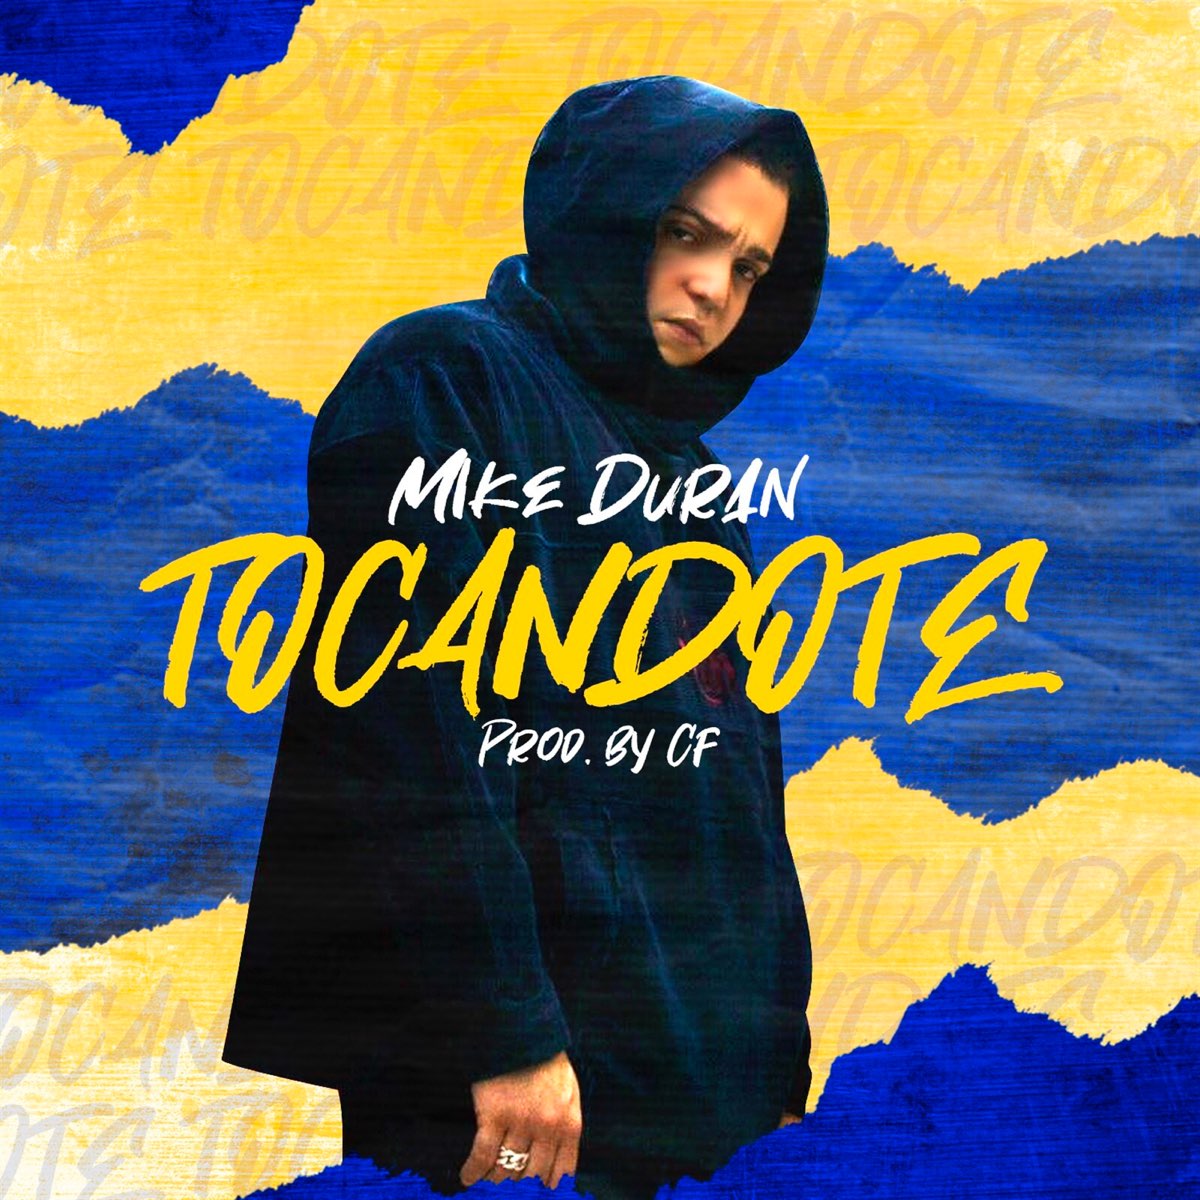 Tocandote - Single by Mike Duran on Apple Music